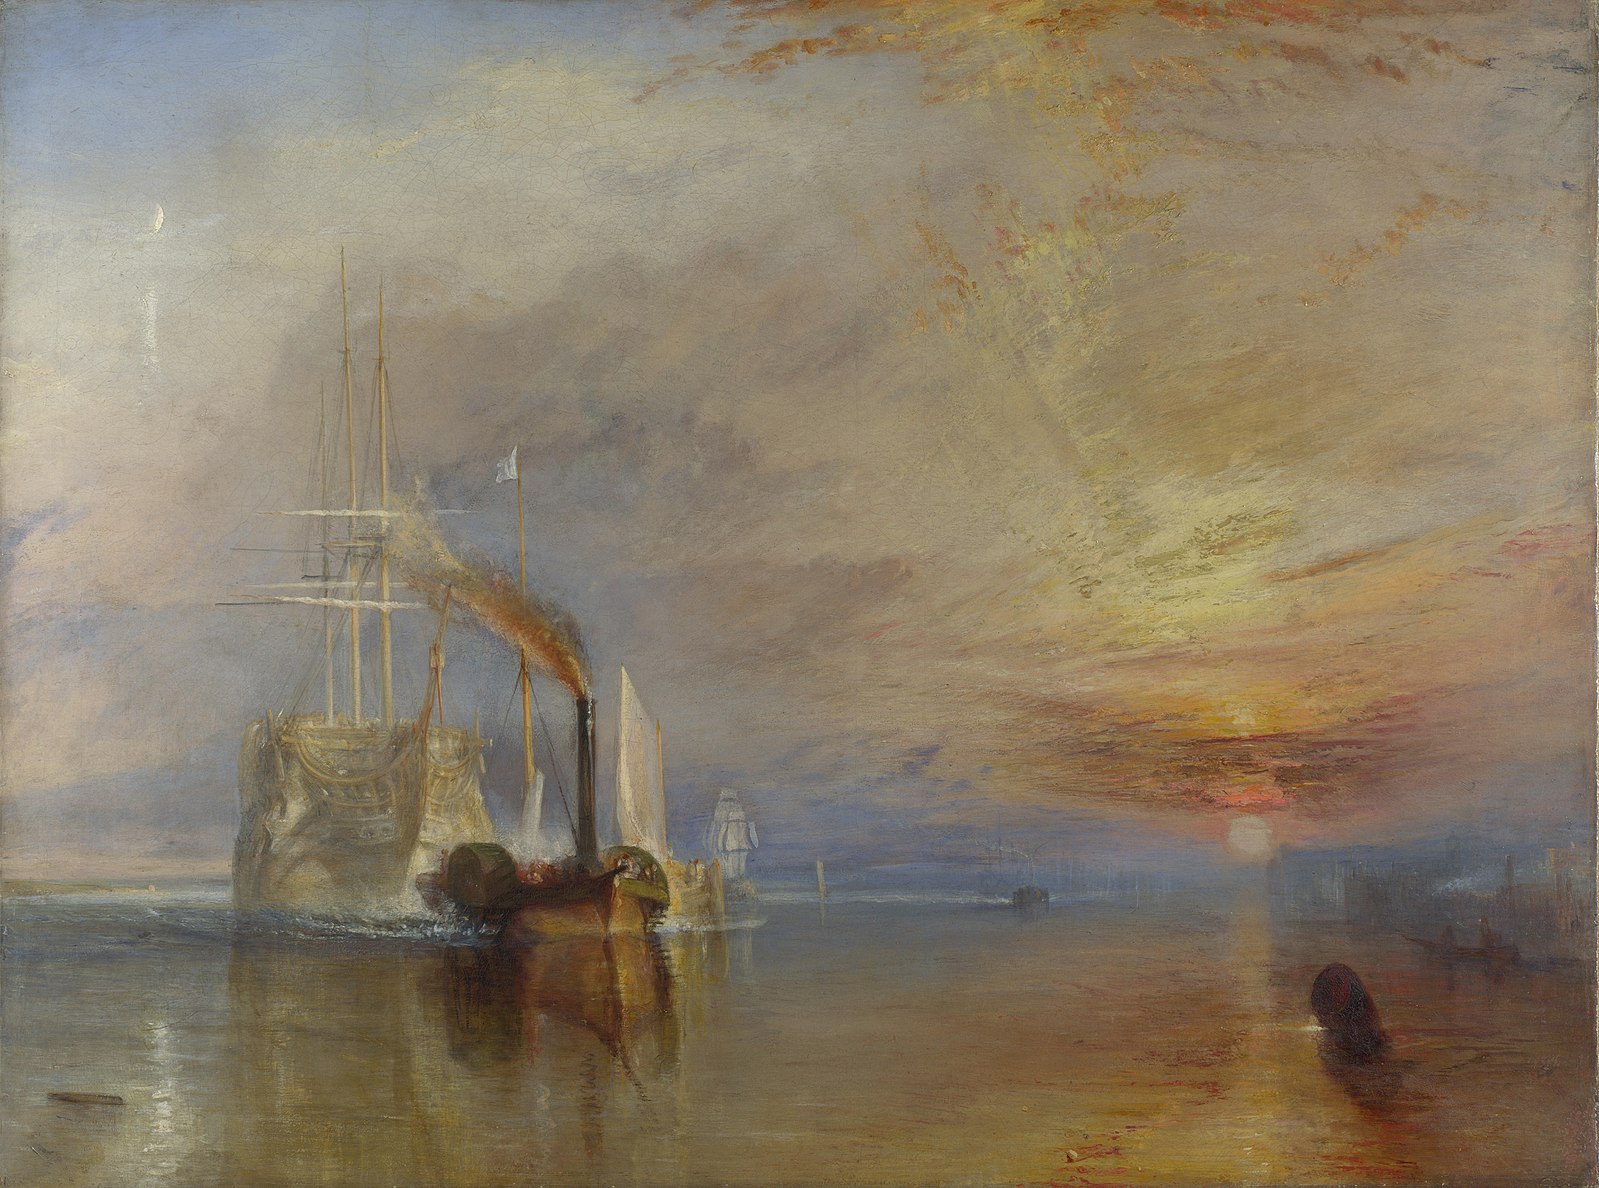 Steam ship on the water with a sunset 